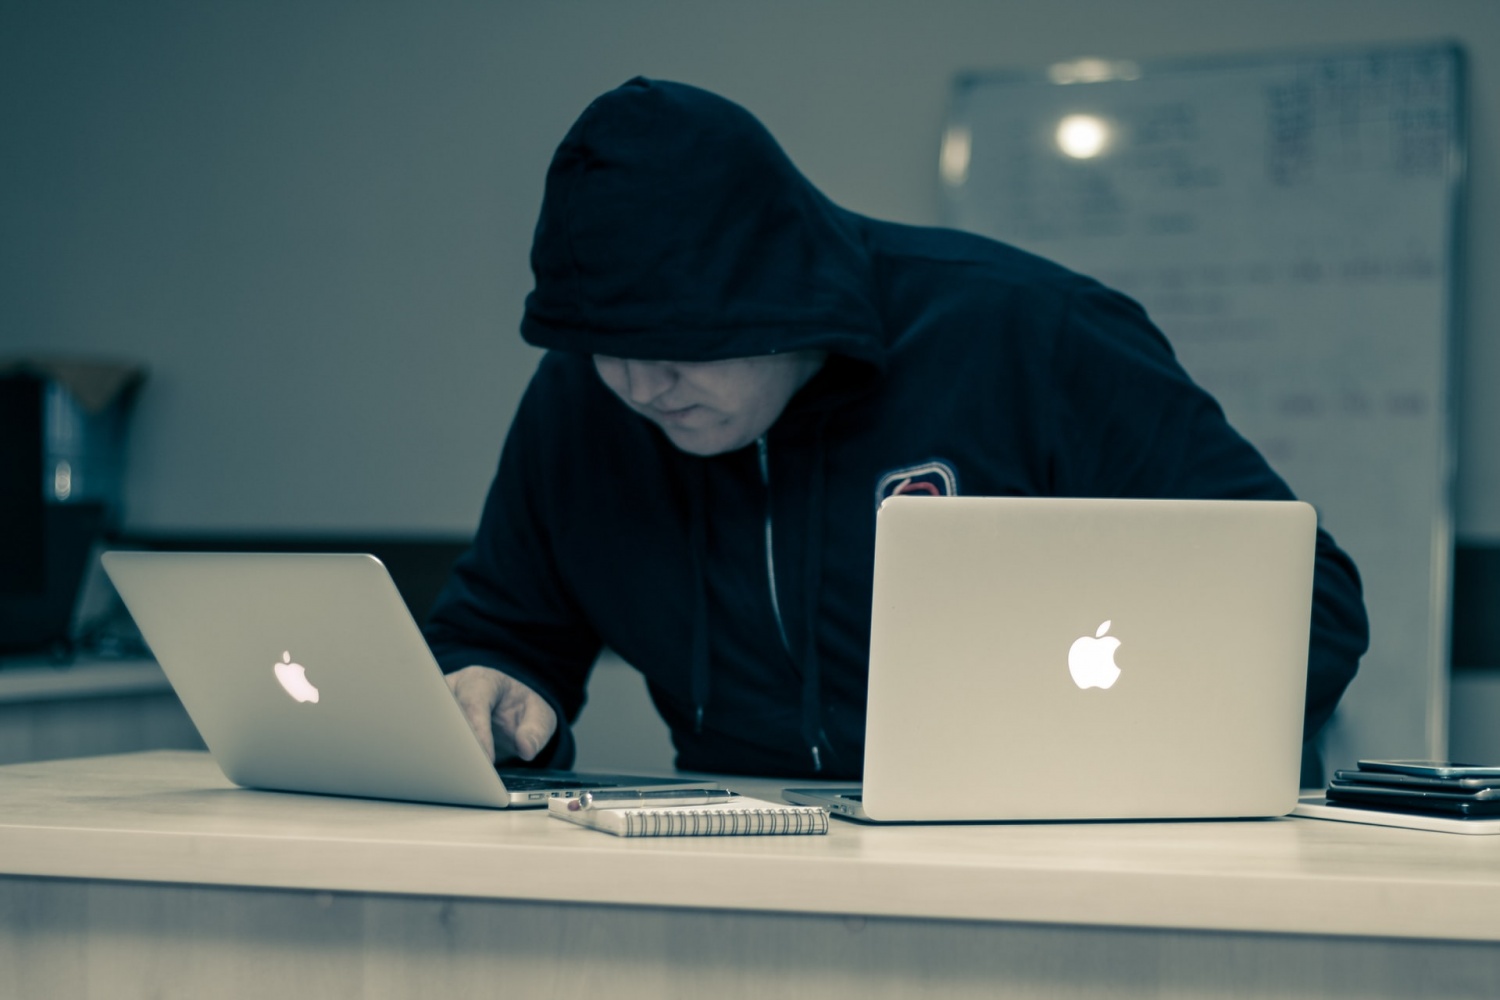 REvil Ransomware Group that Threatened Apple 'Mysteriously' Deleted Documents and Extortion Threats